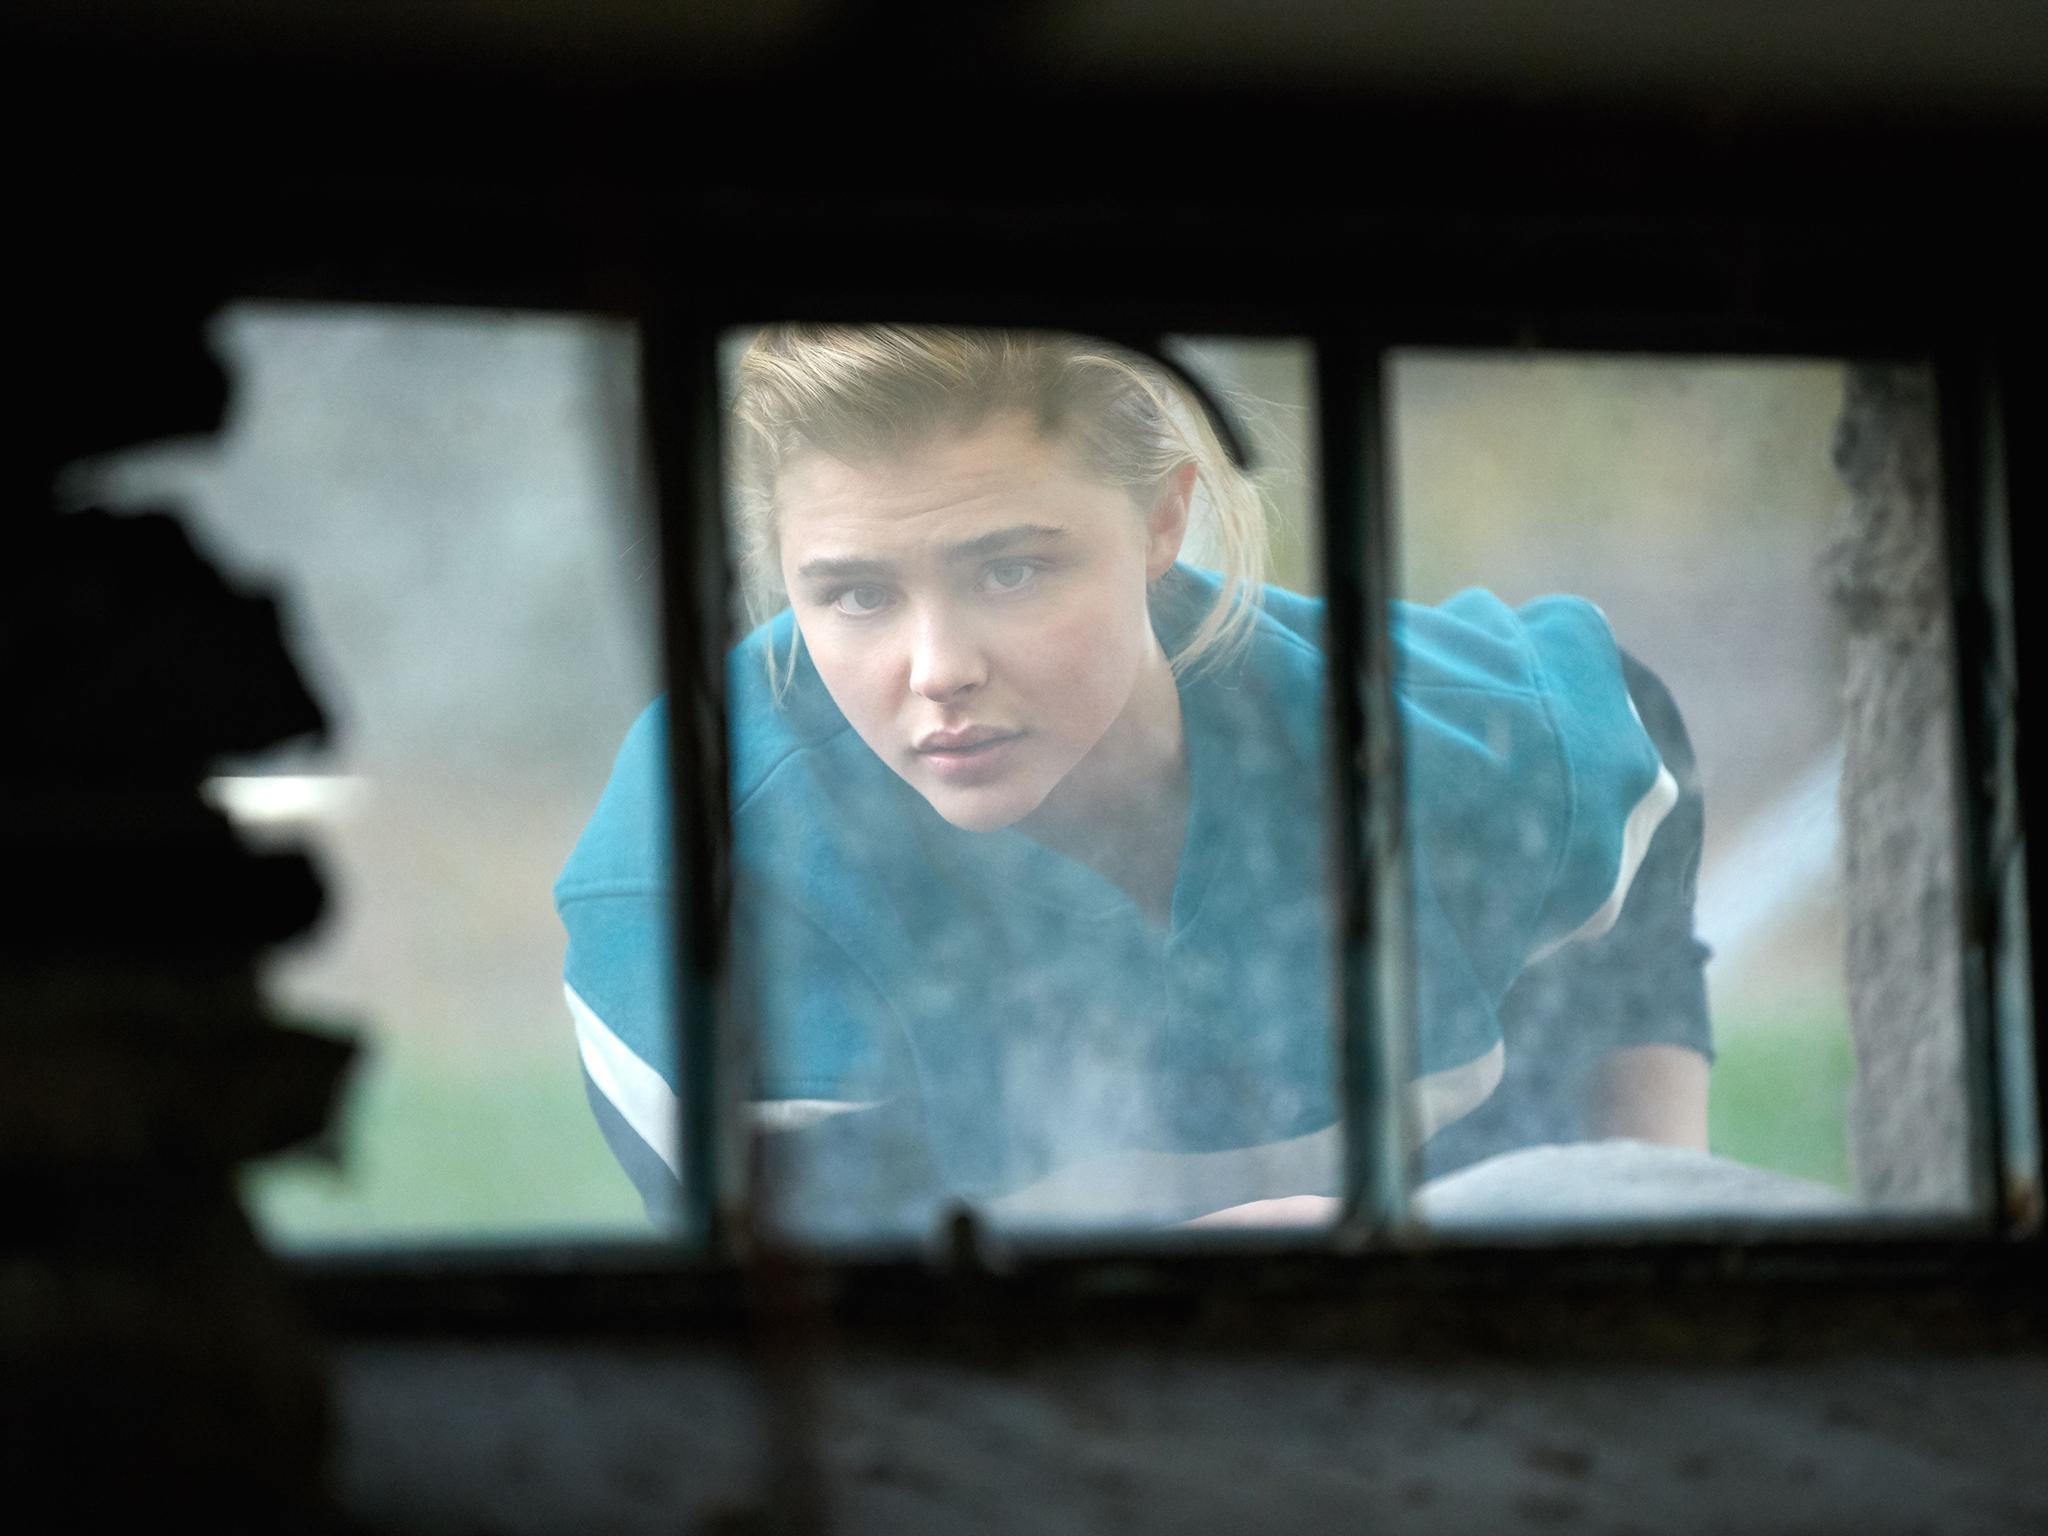 Chloë Grace Moretz on Coming Out, Blurred Lines, and Finding Unity